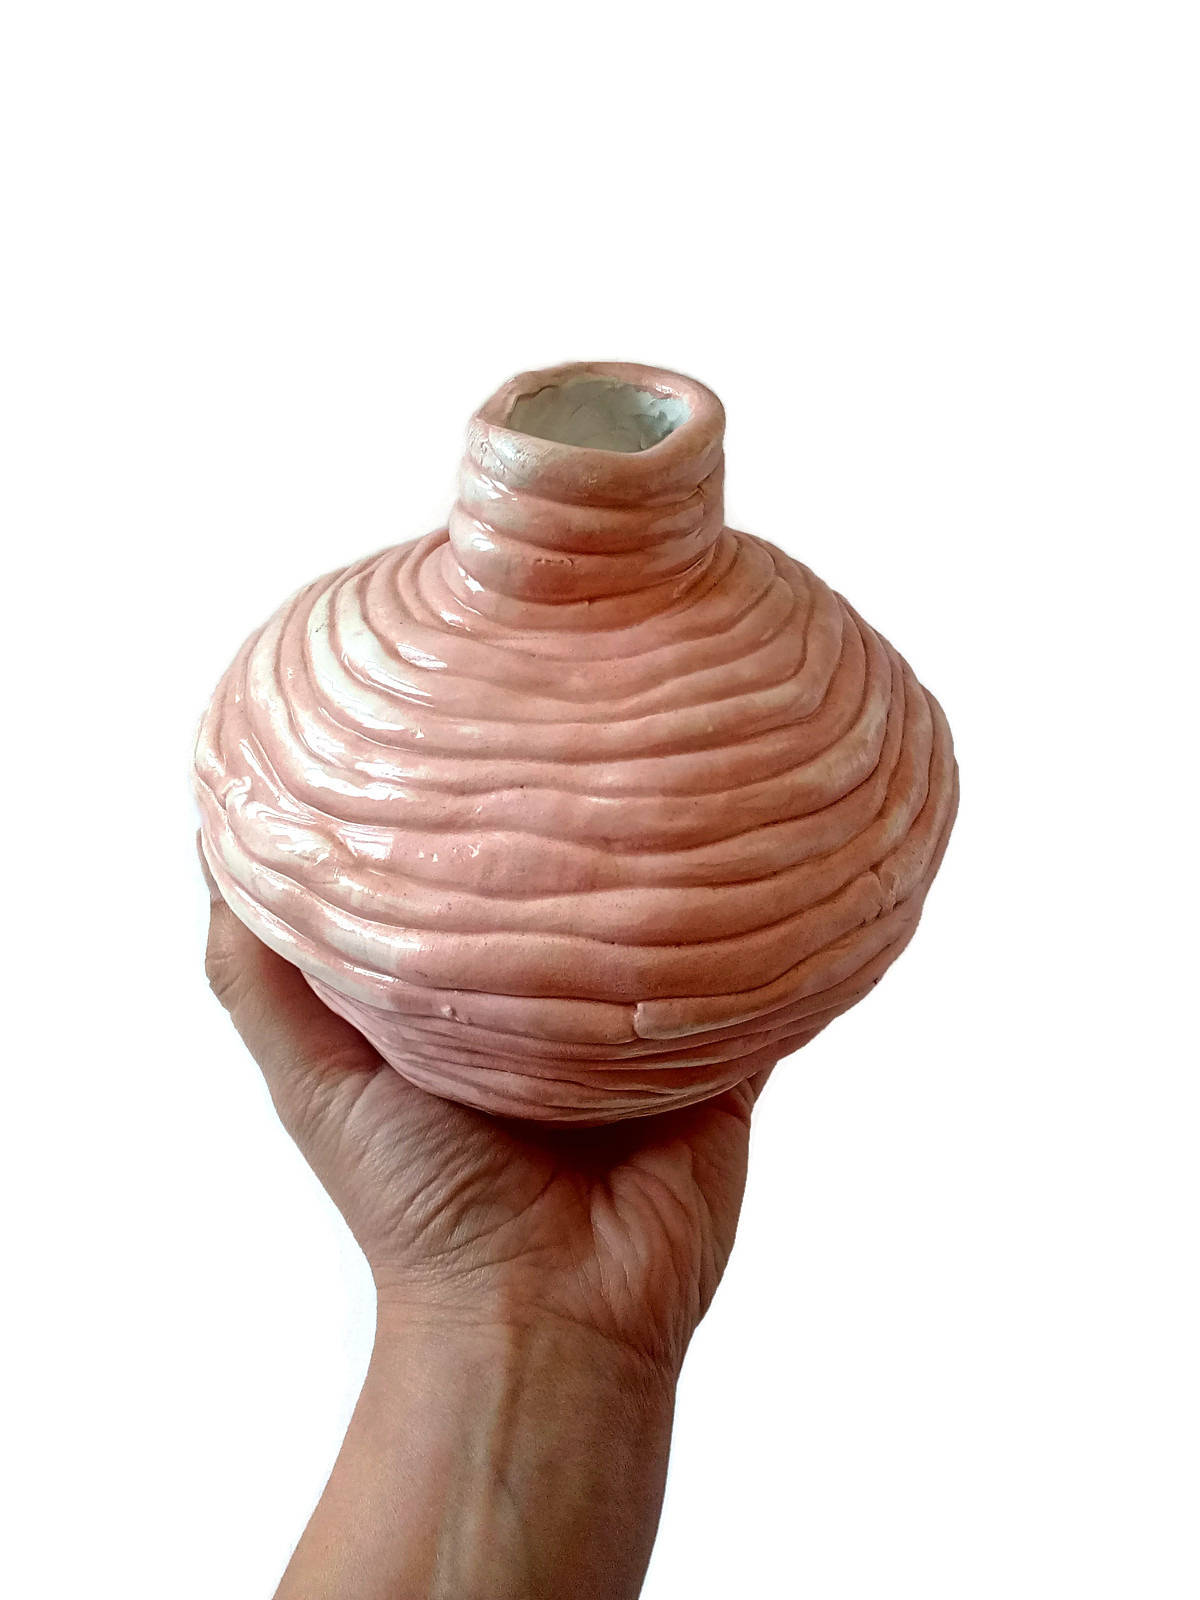 Handmade Ceramic Sculptural Pink Vase For Home Decor, Unique Textured Organic Shape Mid Century Modern Pottery 9th-anniversary gift for wife - Ceramica Ana Rafael